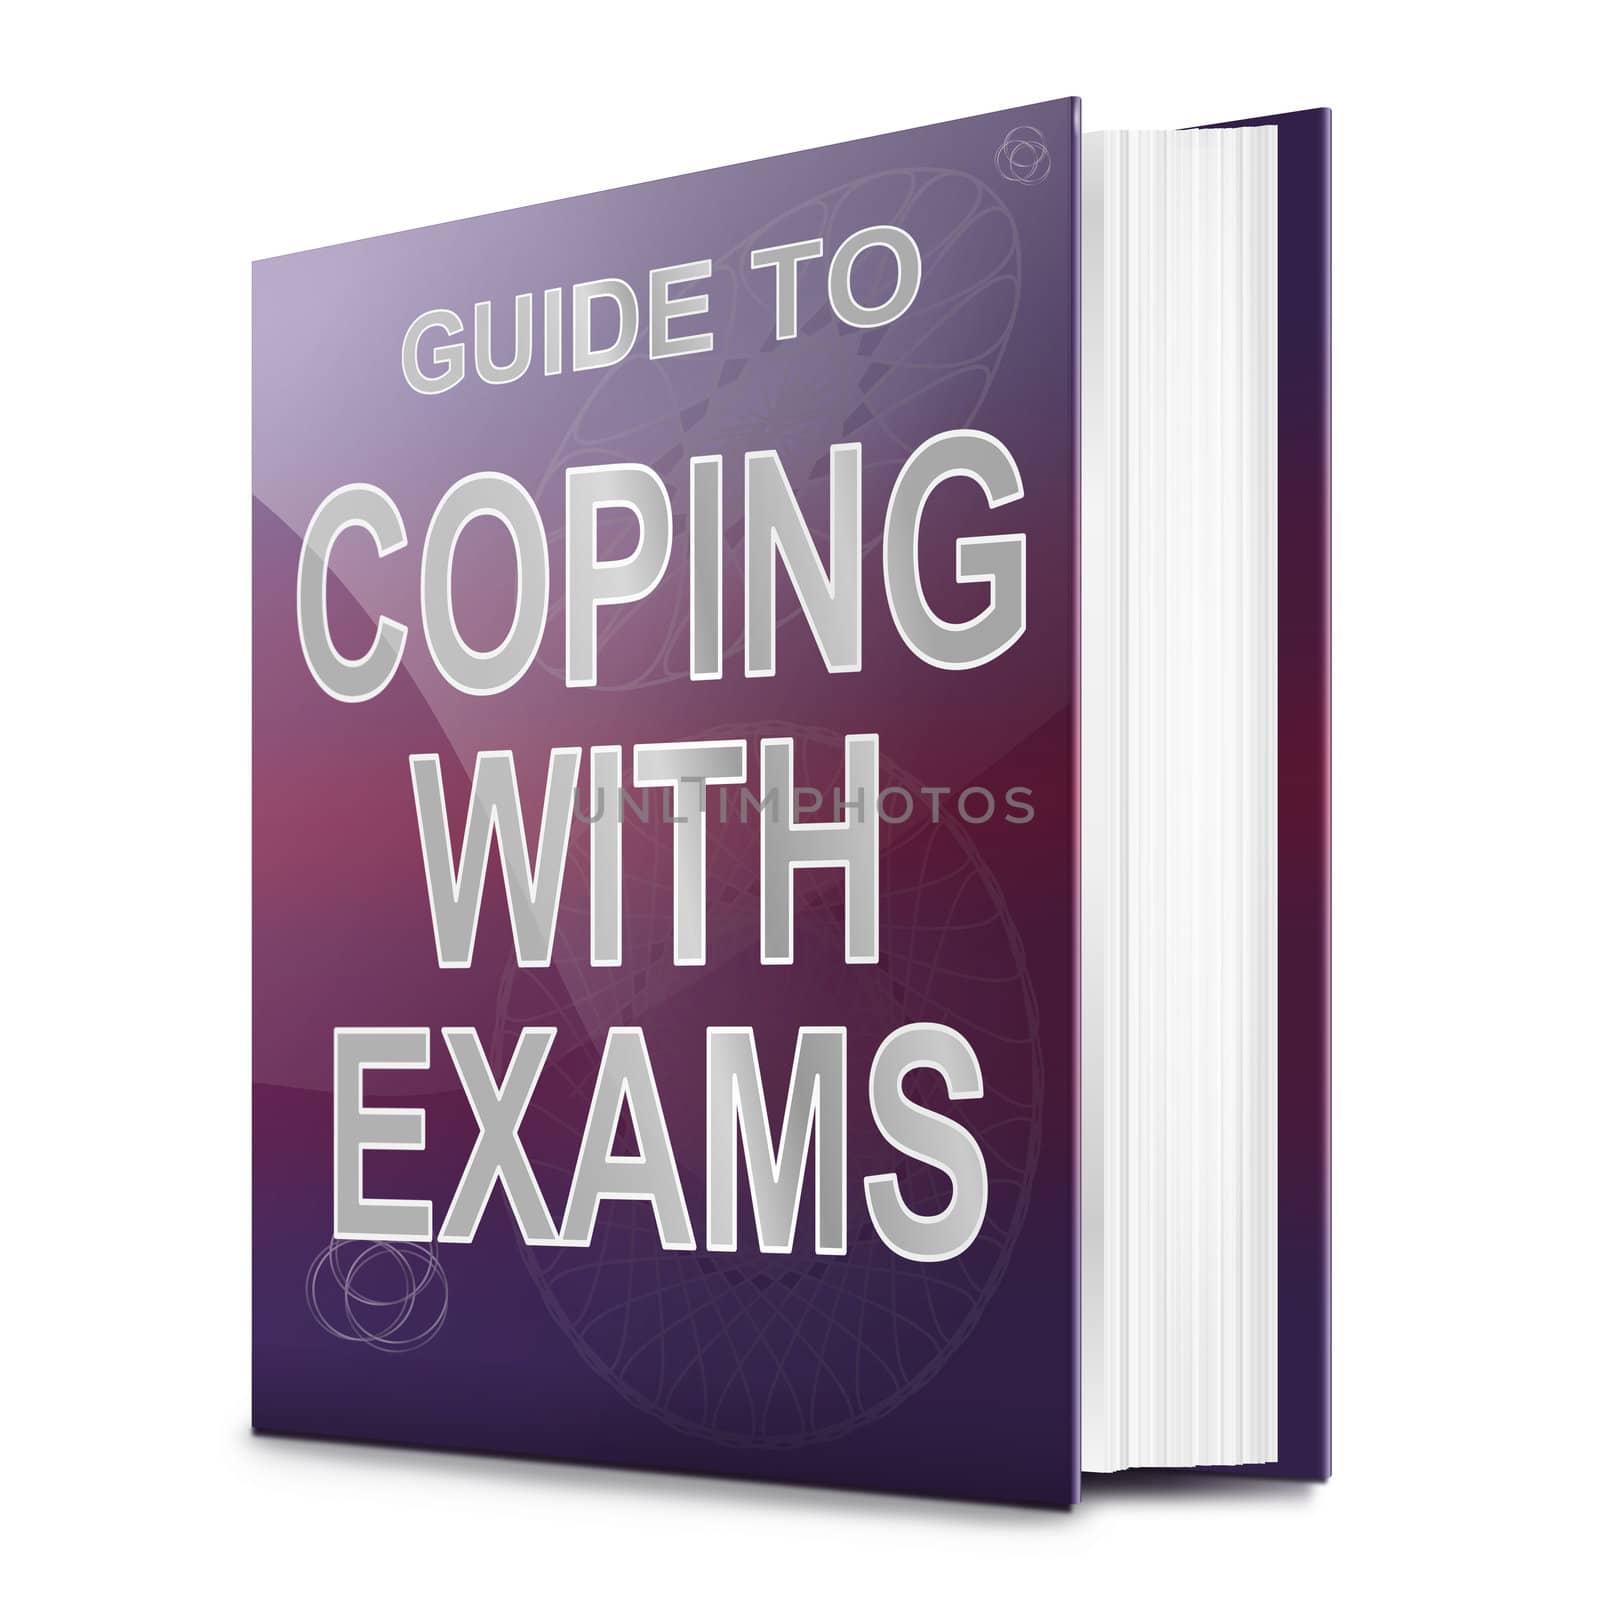 Coping with exams. by 72soul